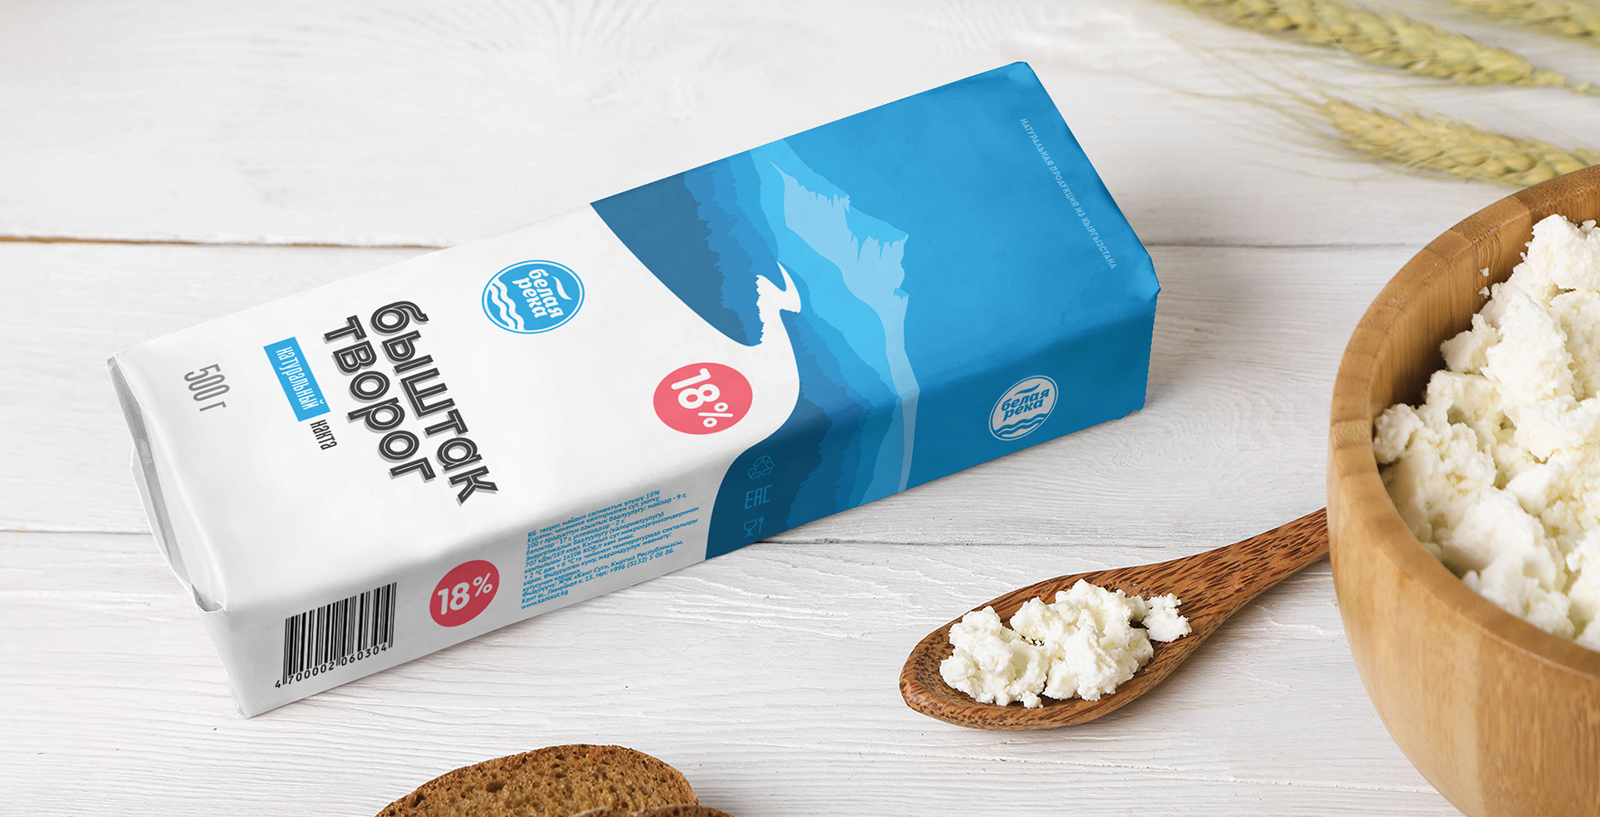 Packaging Redesign: White River Dairy